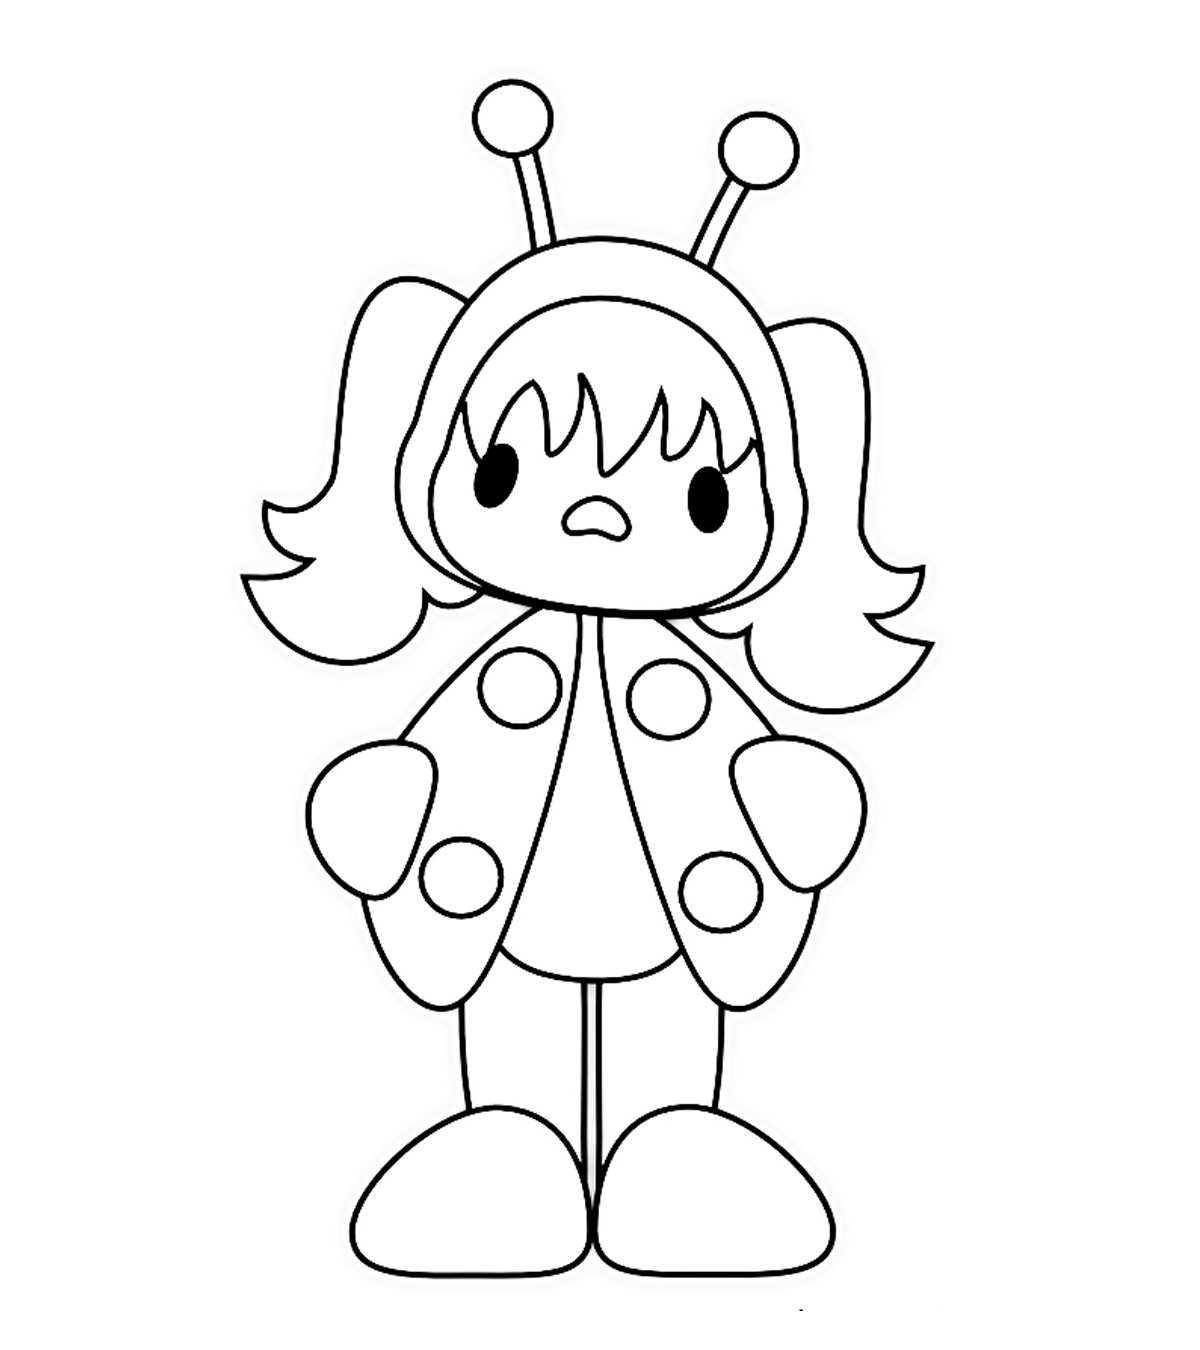 15 Cute Ladybug Coloring Pages Your Little Girl Will Love To Color_image